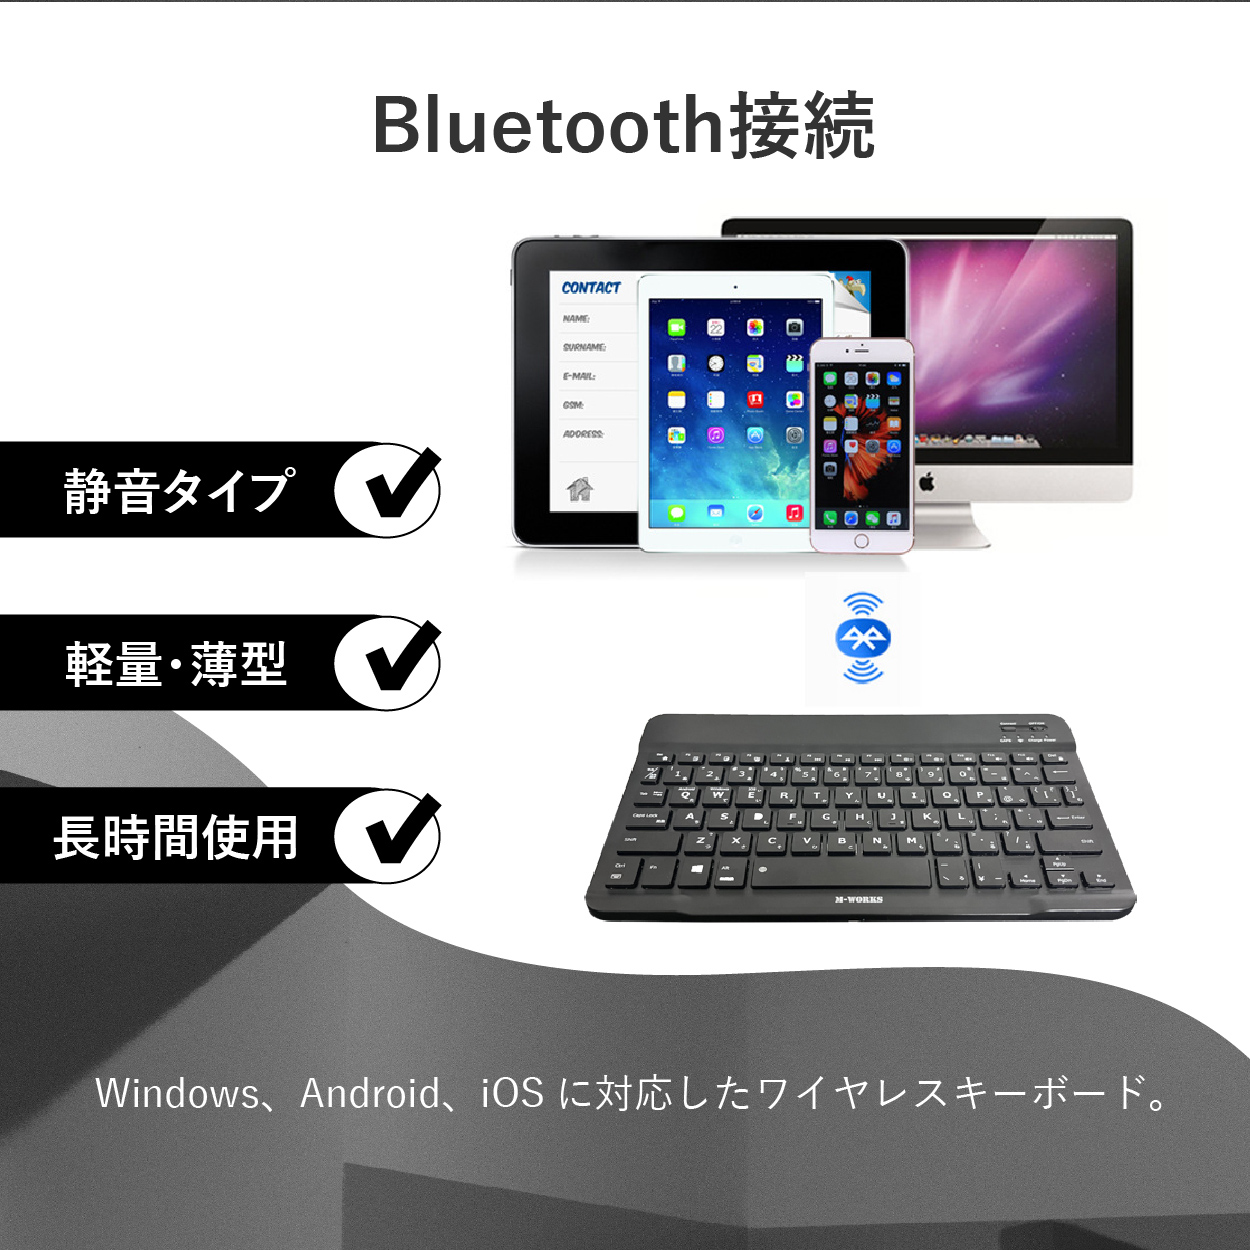  rhinoceros L M-WORKS keyboard Bluetooth wireless wireless personal computer Japanese arrangement .. input rechargeable iOS / Android / Windows / chrome